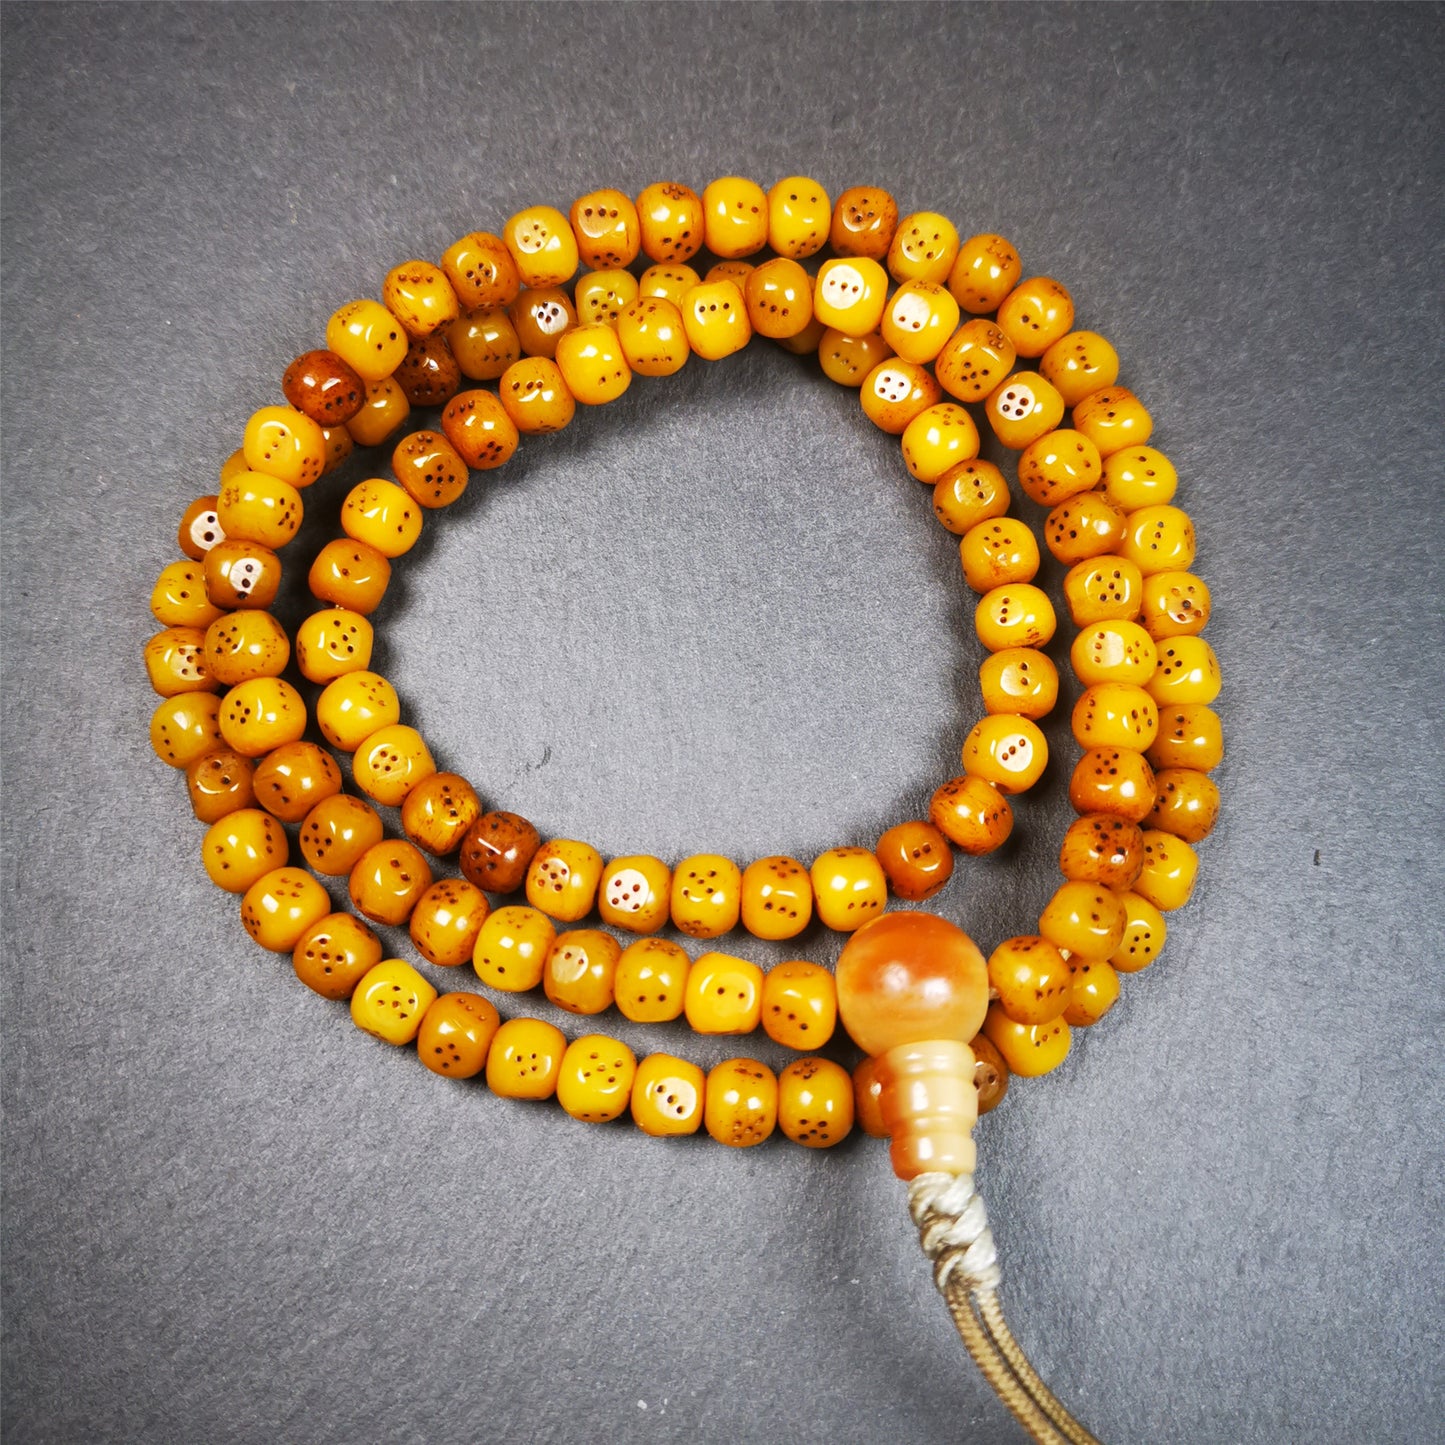 This mala bracelet was made by Tibetan craftsmen.  It is made of yak bone, yellow color,108 dice beads diameter of 7mm / 0.27",circumference is 68cm / 26.8" ,  end of a yak horn guru bead.